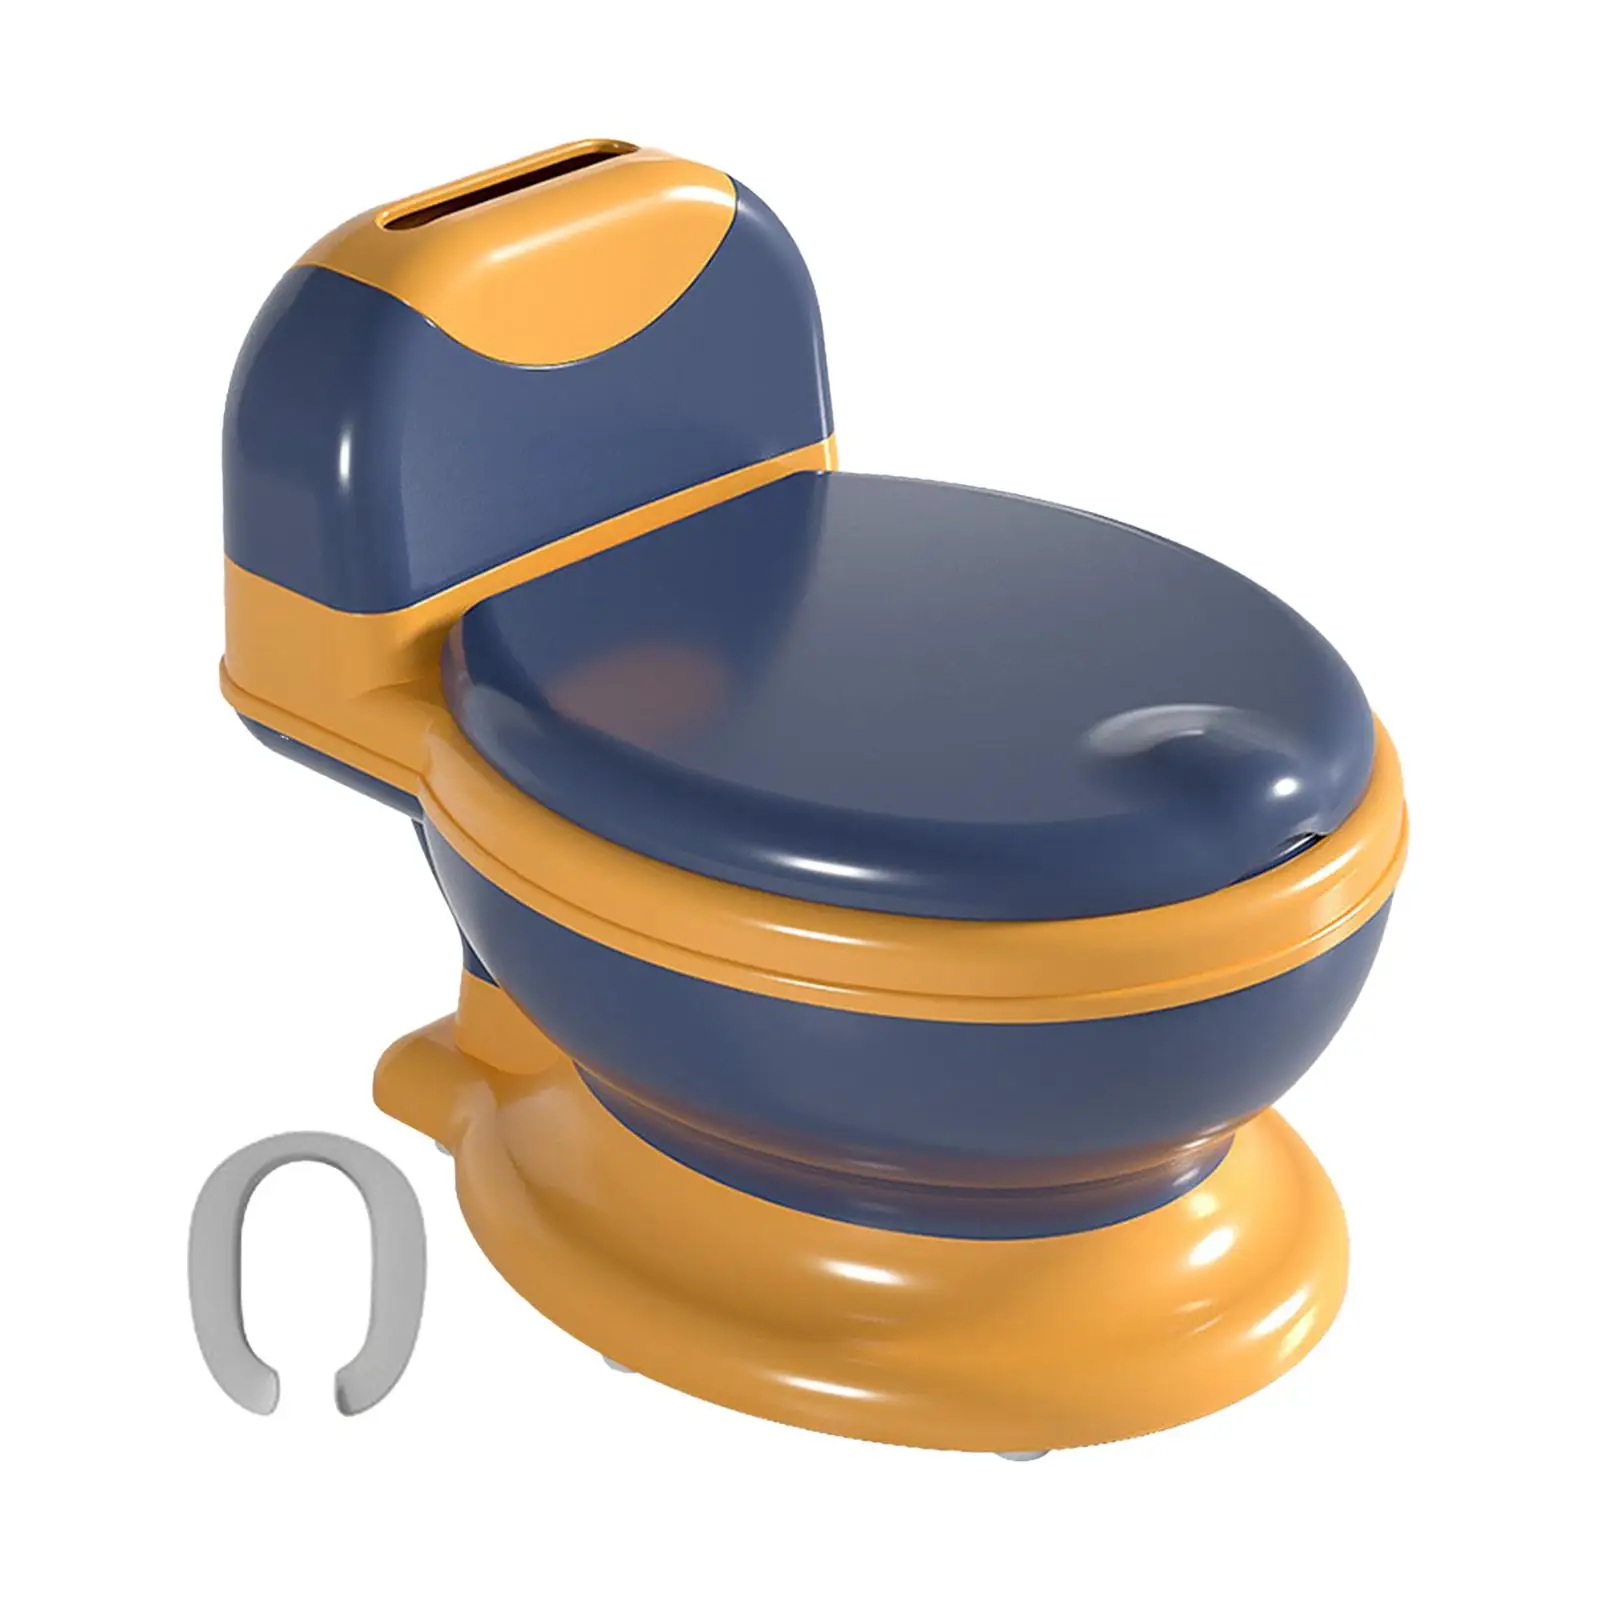 Potty Train Toilet Toilet Training Seat Potty Seat Toddlers Potty Chair Realistic Toilet for Baby Kids Toddlers Boys Girls